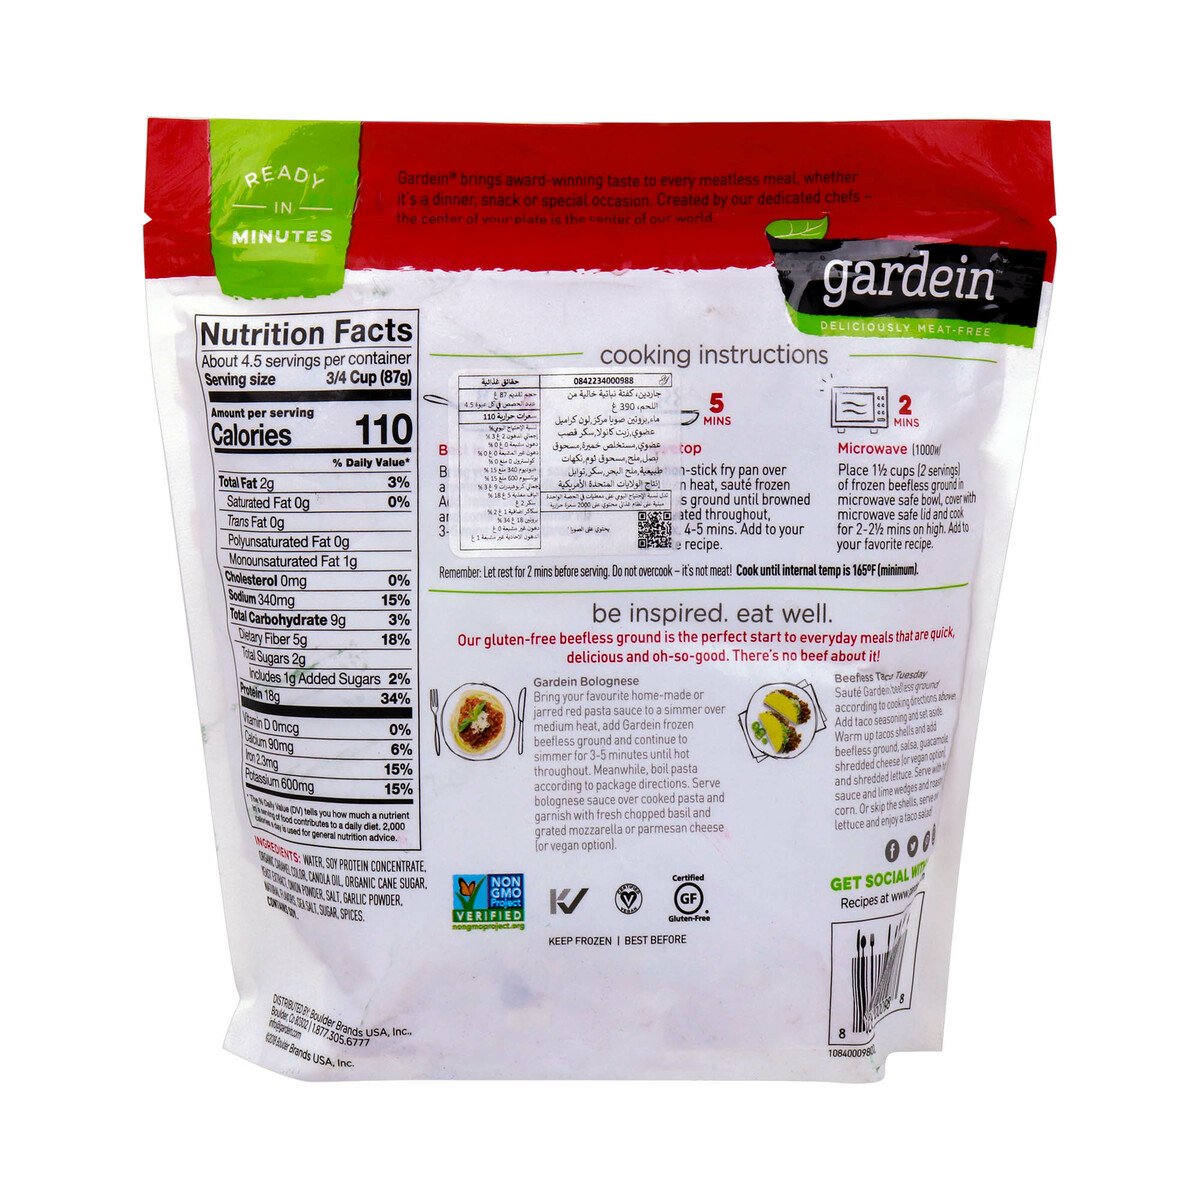 Gardein Meat Free The Ultimate Beefless Ground 390 g